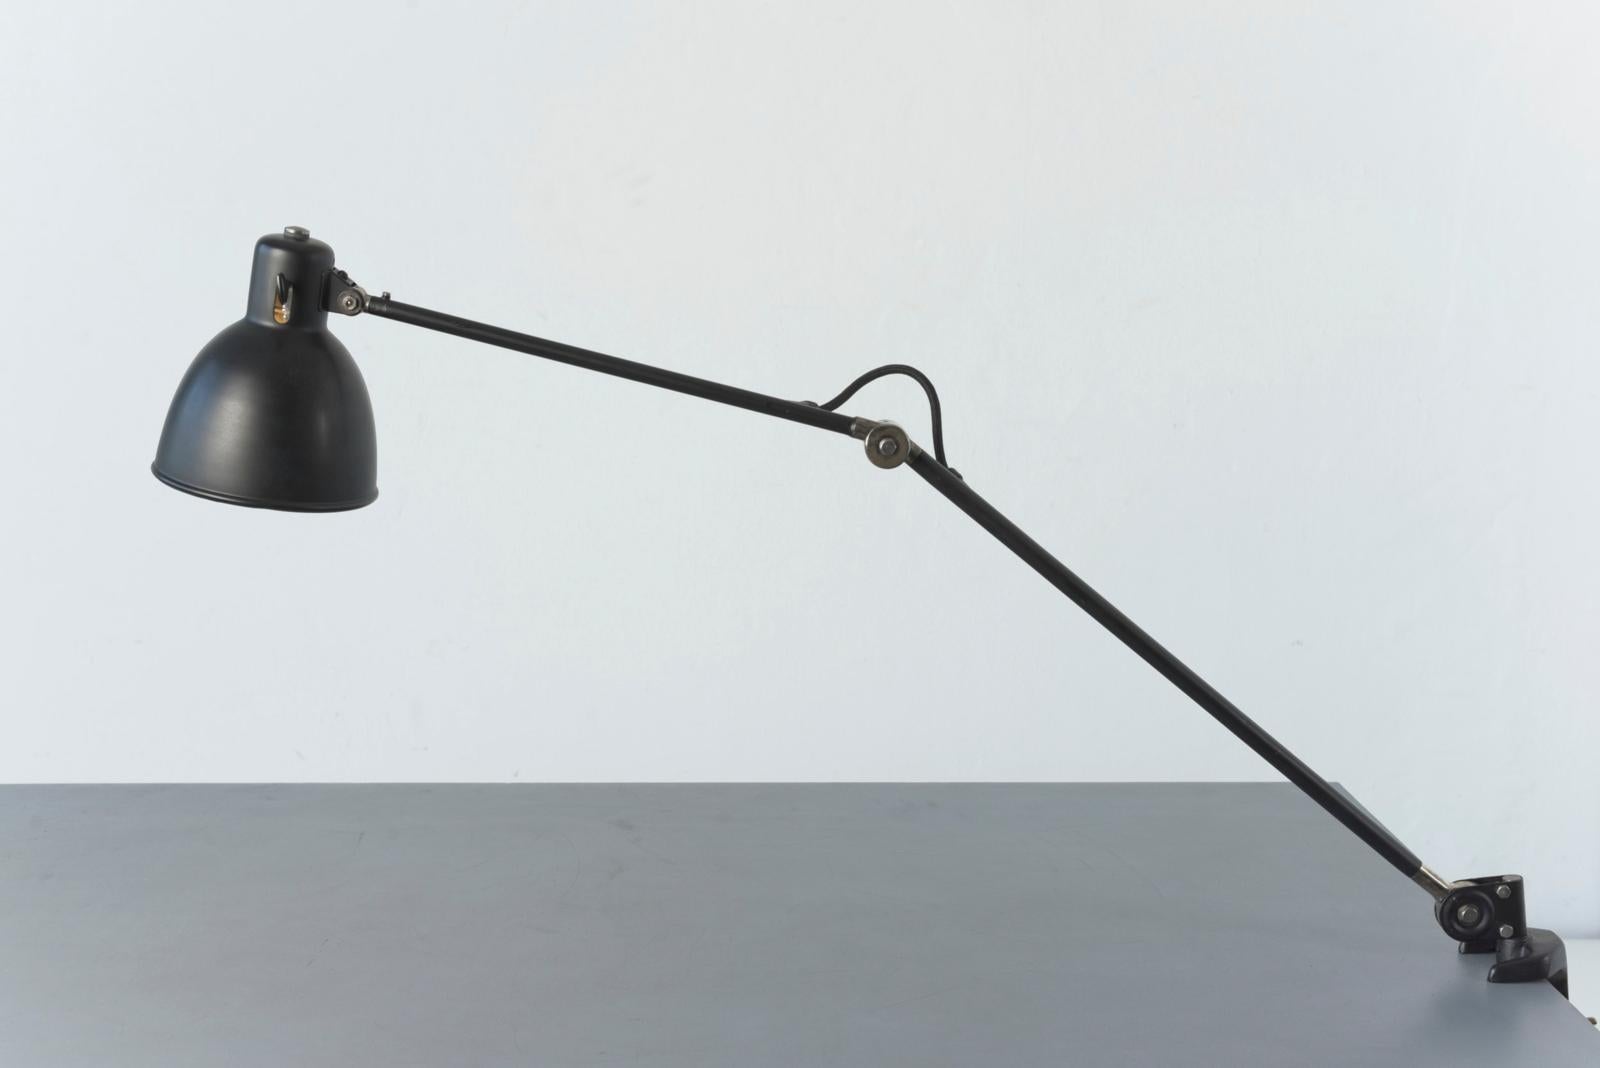 H 110 cm W 110 cm D 16 cm

Material: Sheet iron painted matt black, nickel-plated brass, steel with matt black paint, black textile connection cable, rotary switch on the socket, E 27 socket, solid cast iron screw clamp, 3 joints.

Condition: good